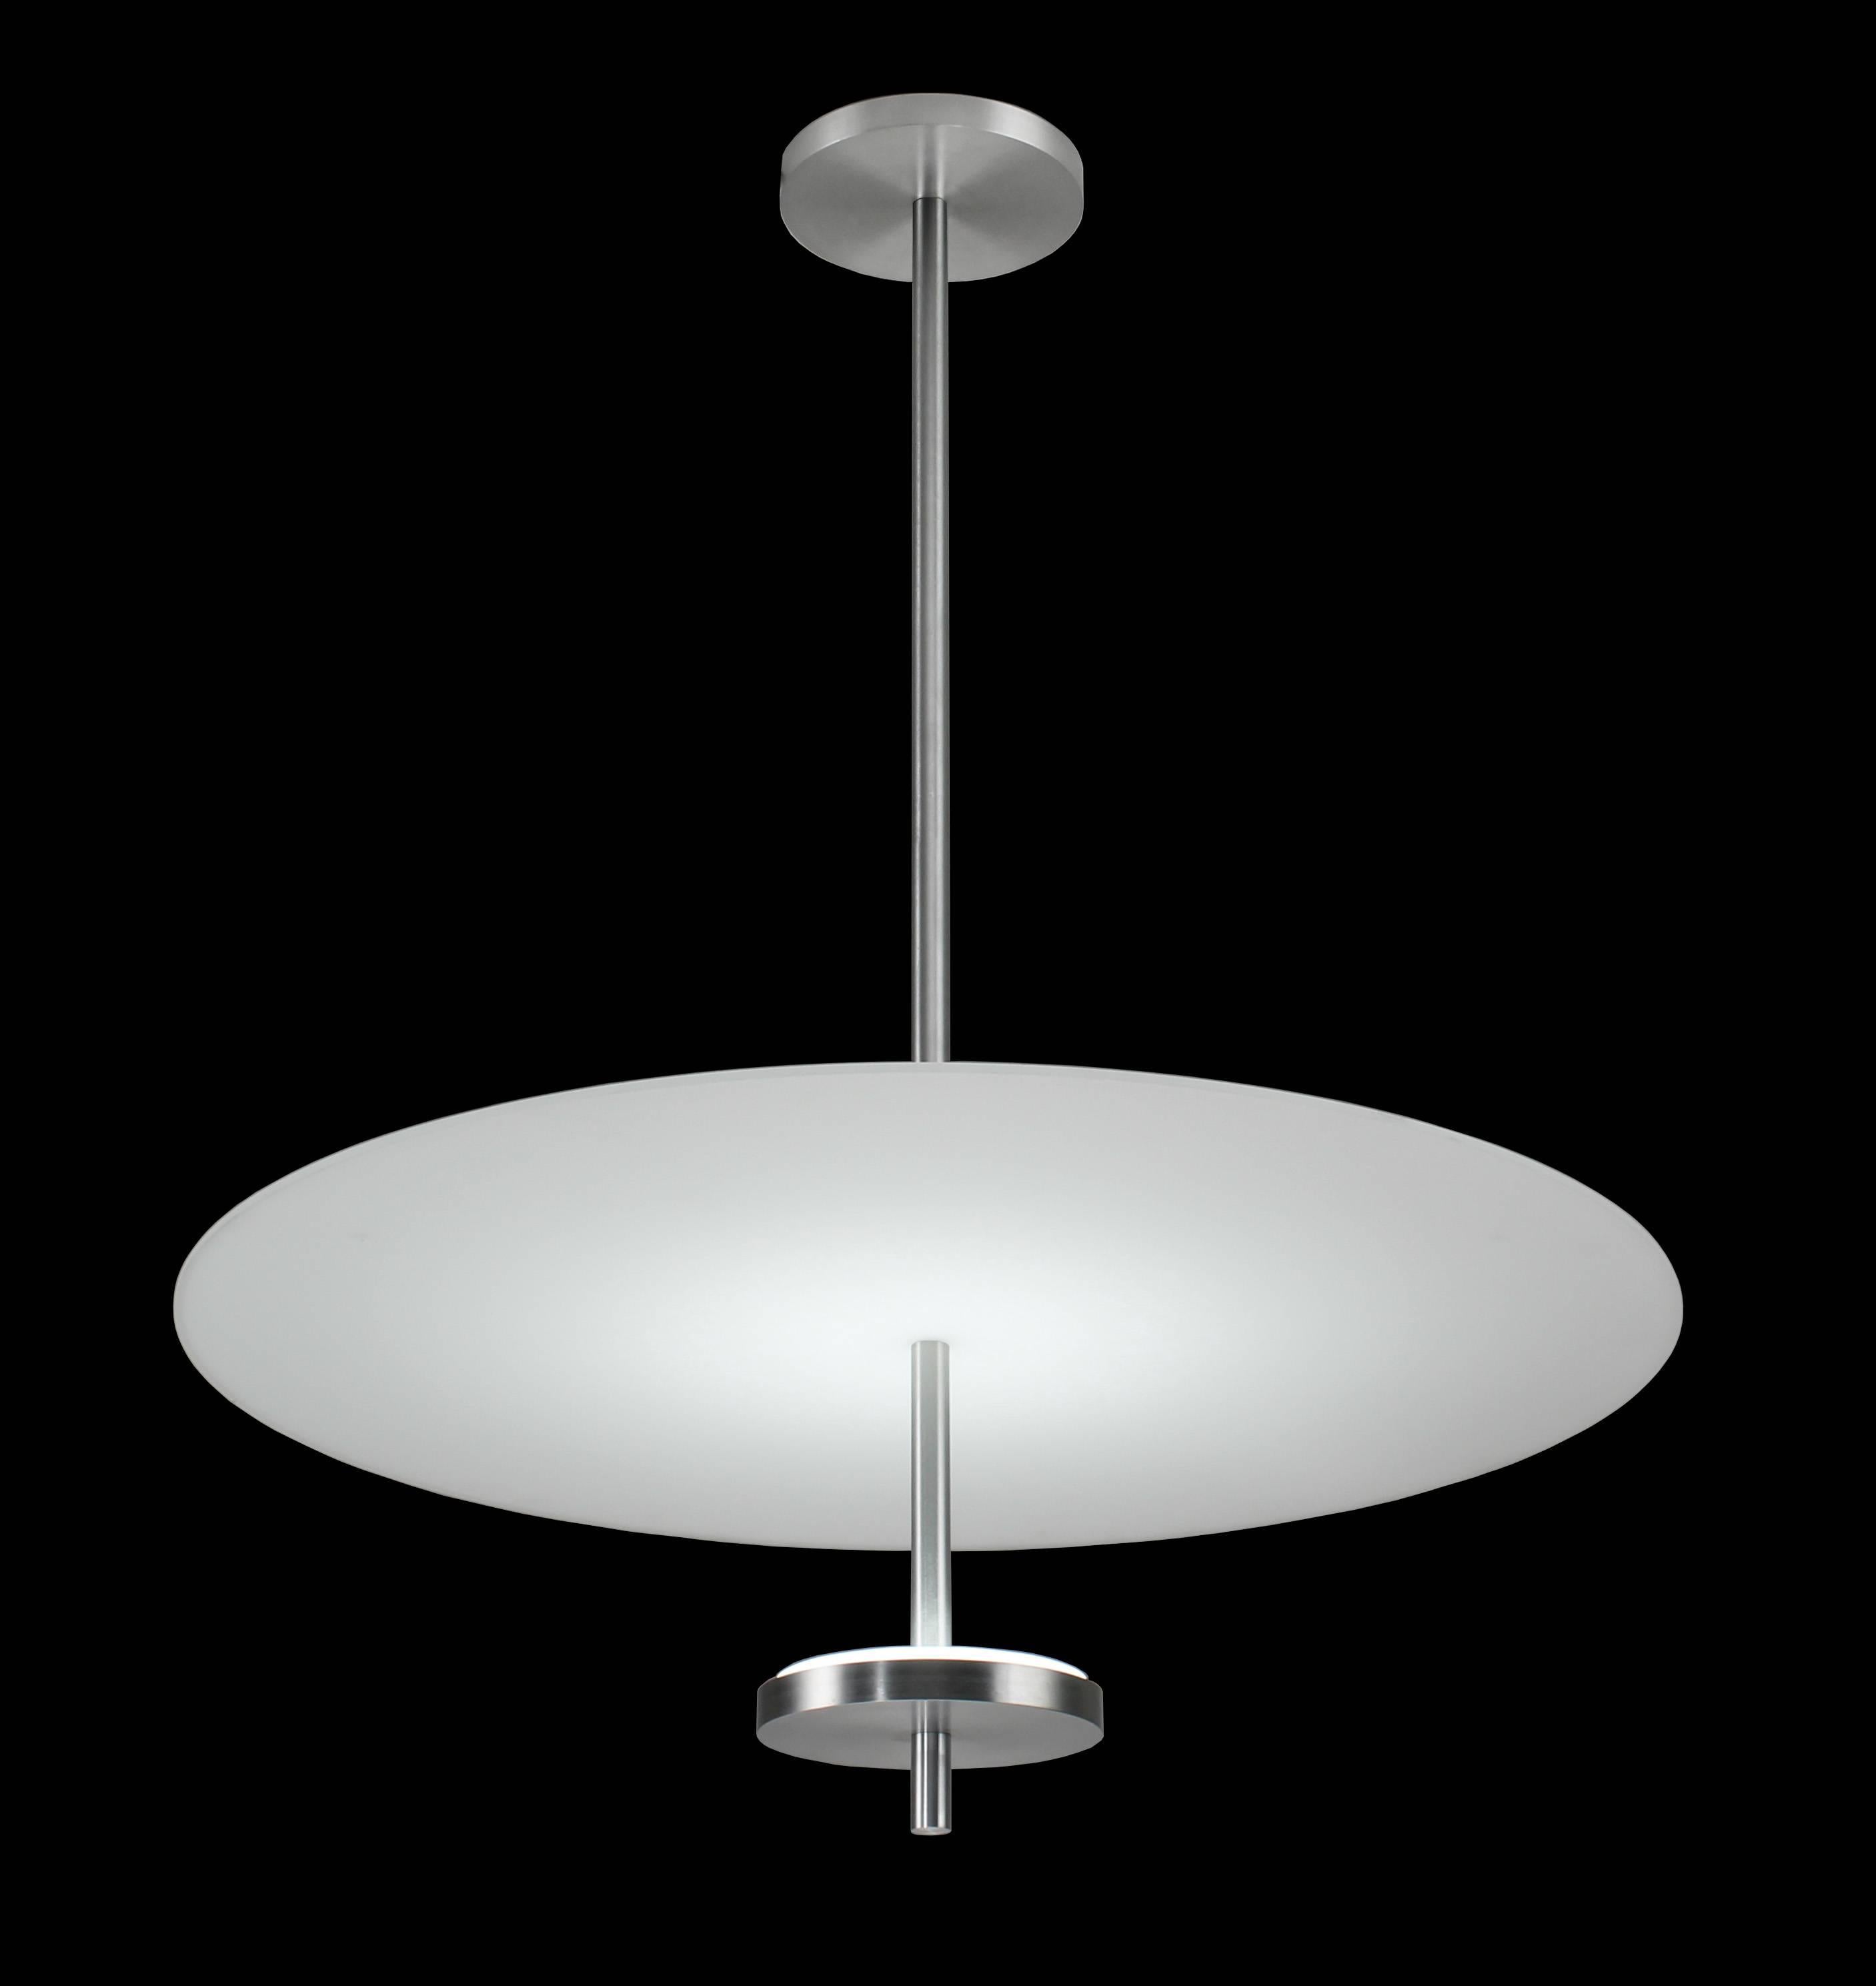 24 inch diameter flat glass pendant light. Mid-Century Modern style. Top glass acts as a reflector for the lower spread lens. Fixture provides reflected light downward and a soft light to the ceiling above through the top glass. LED illuminated,